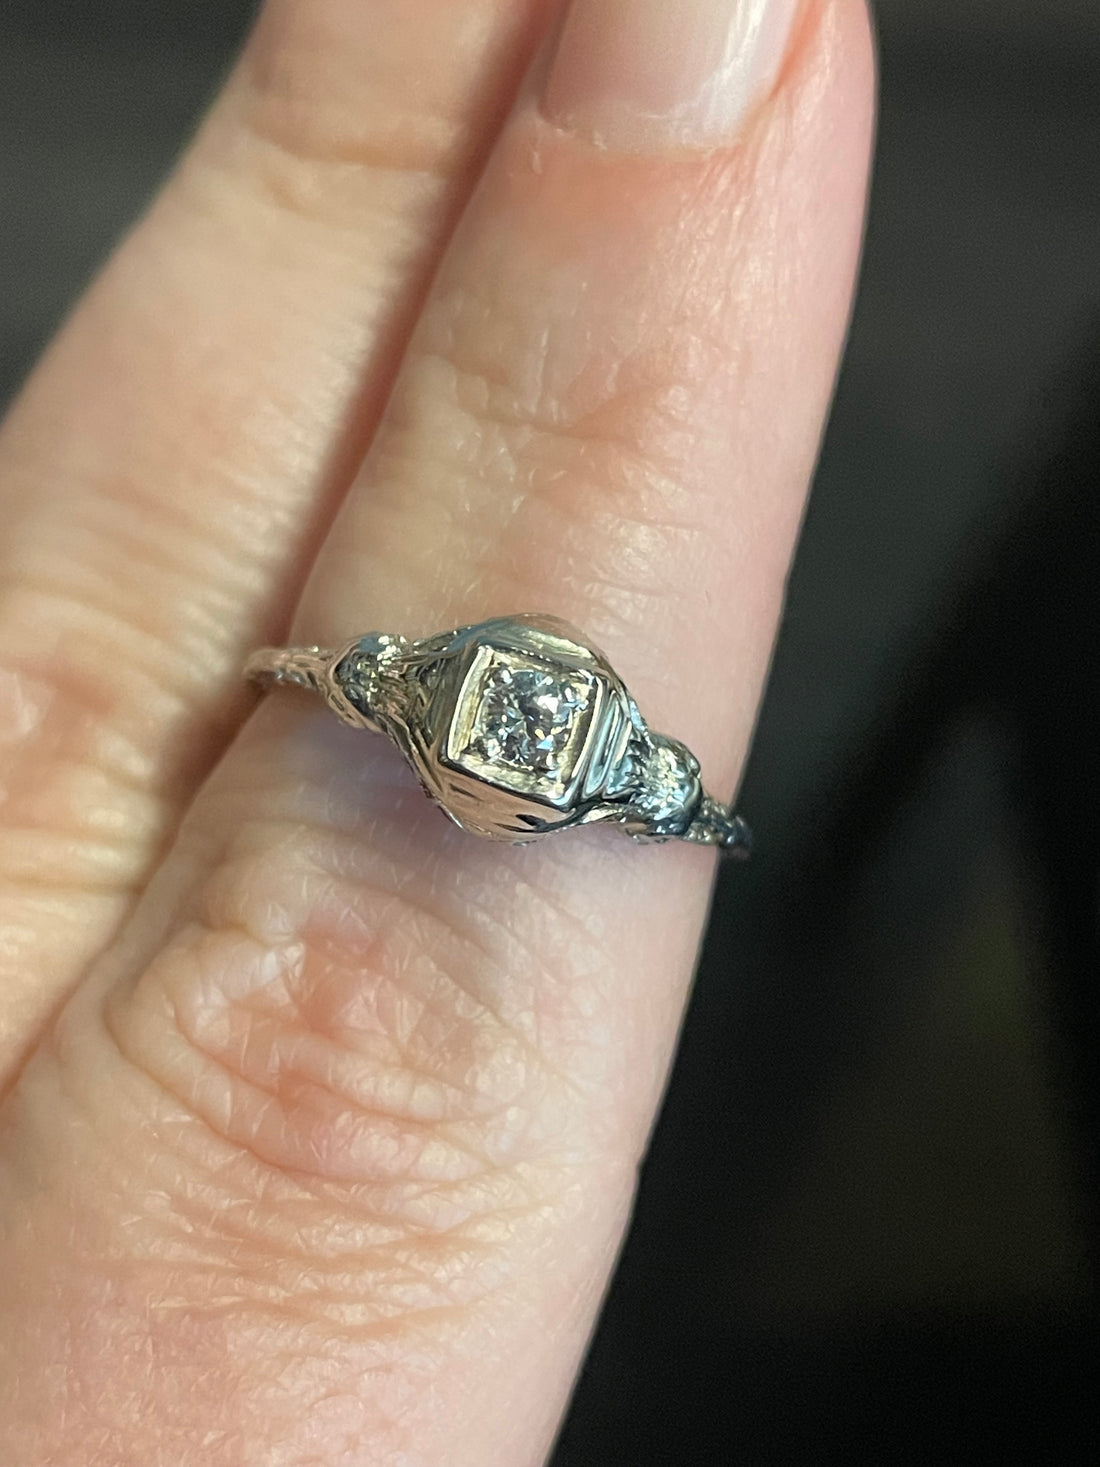 From the Repair Shop: 4 Things to Know About Vintage Rings